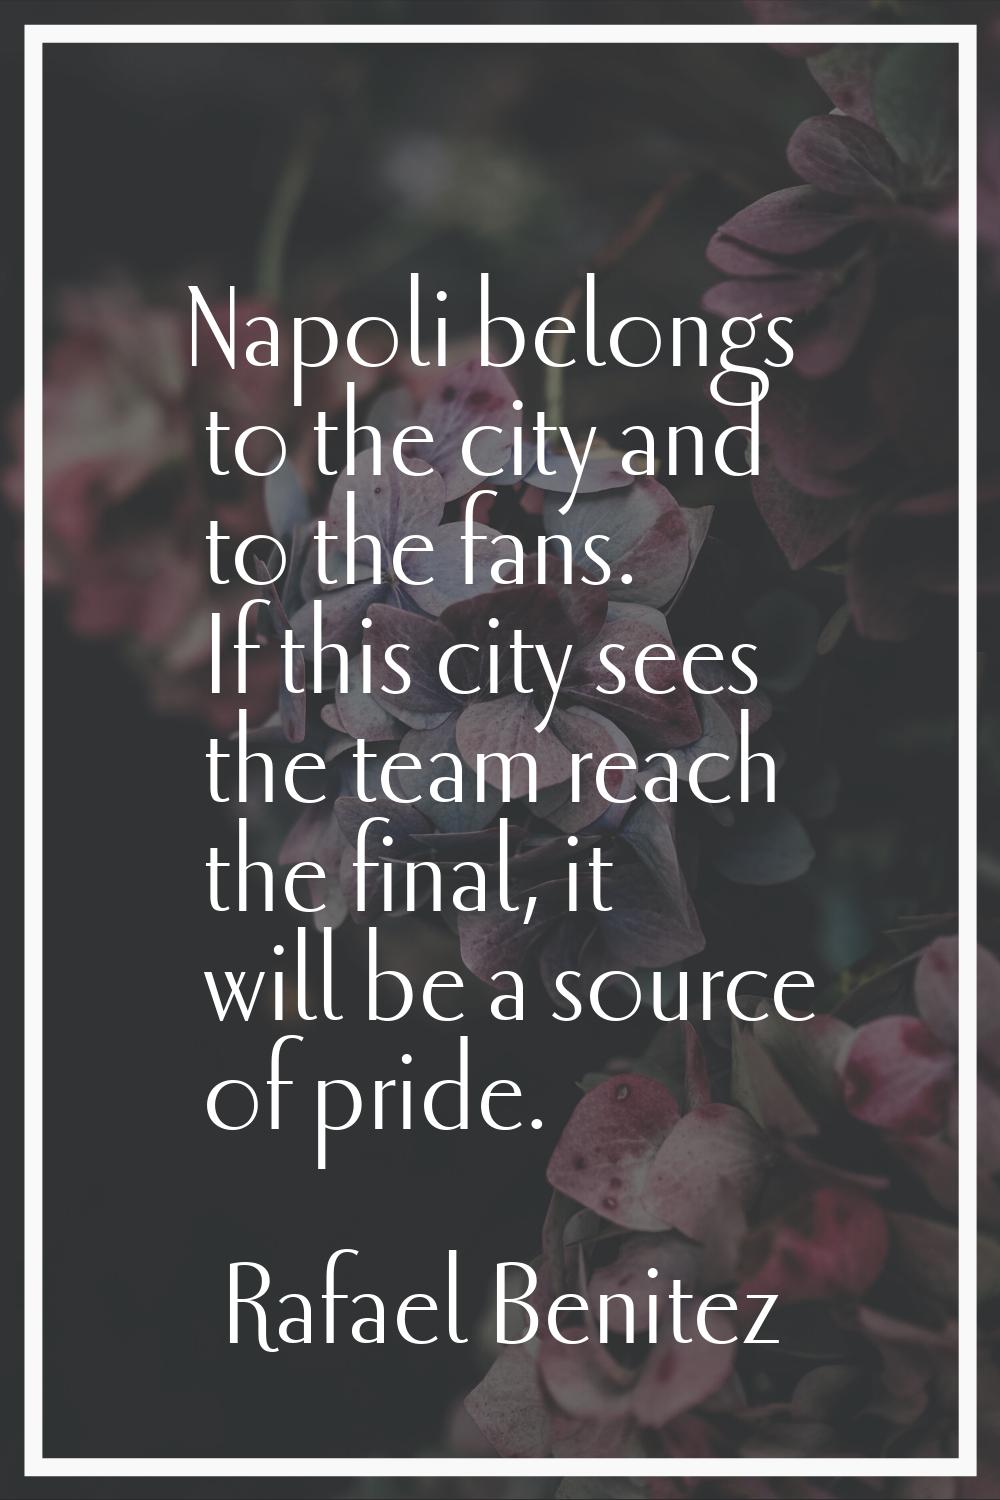 Napoli belongs to the city and to the fans. If this city sees the team reach the final, it will be 